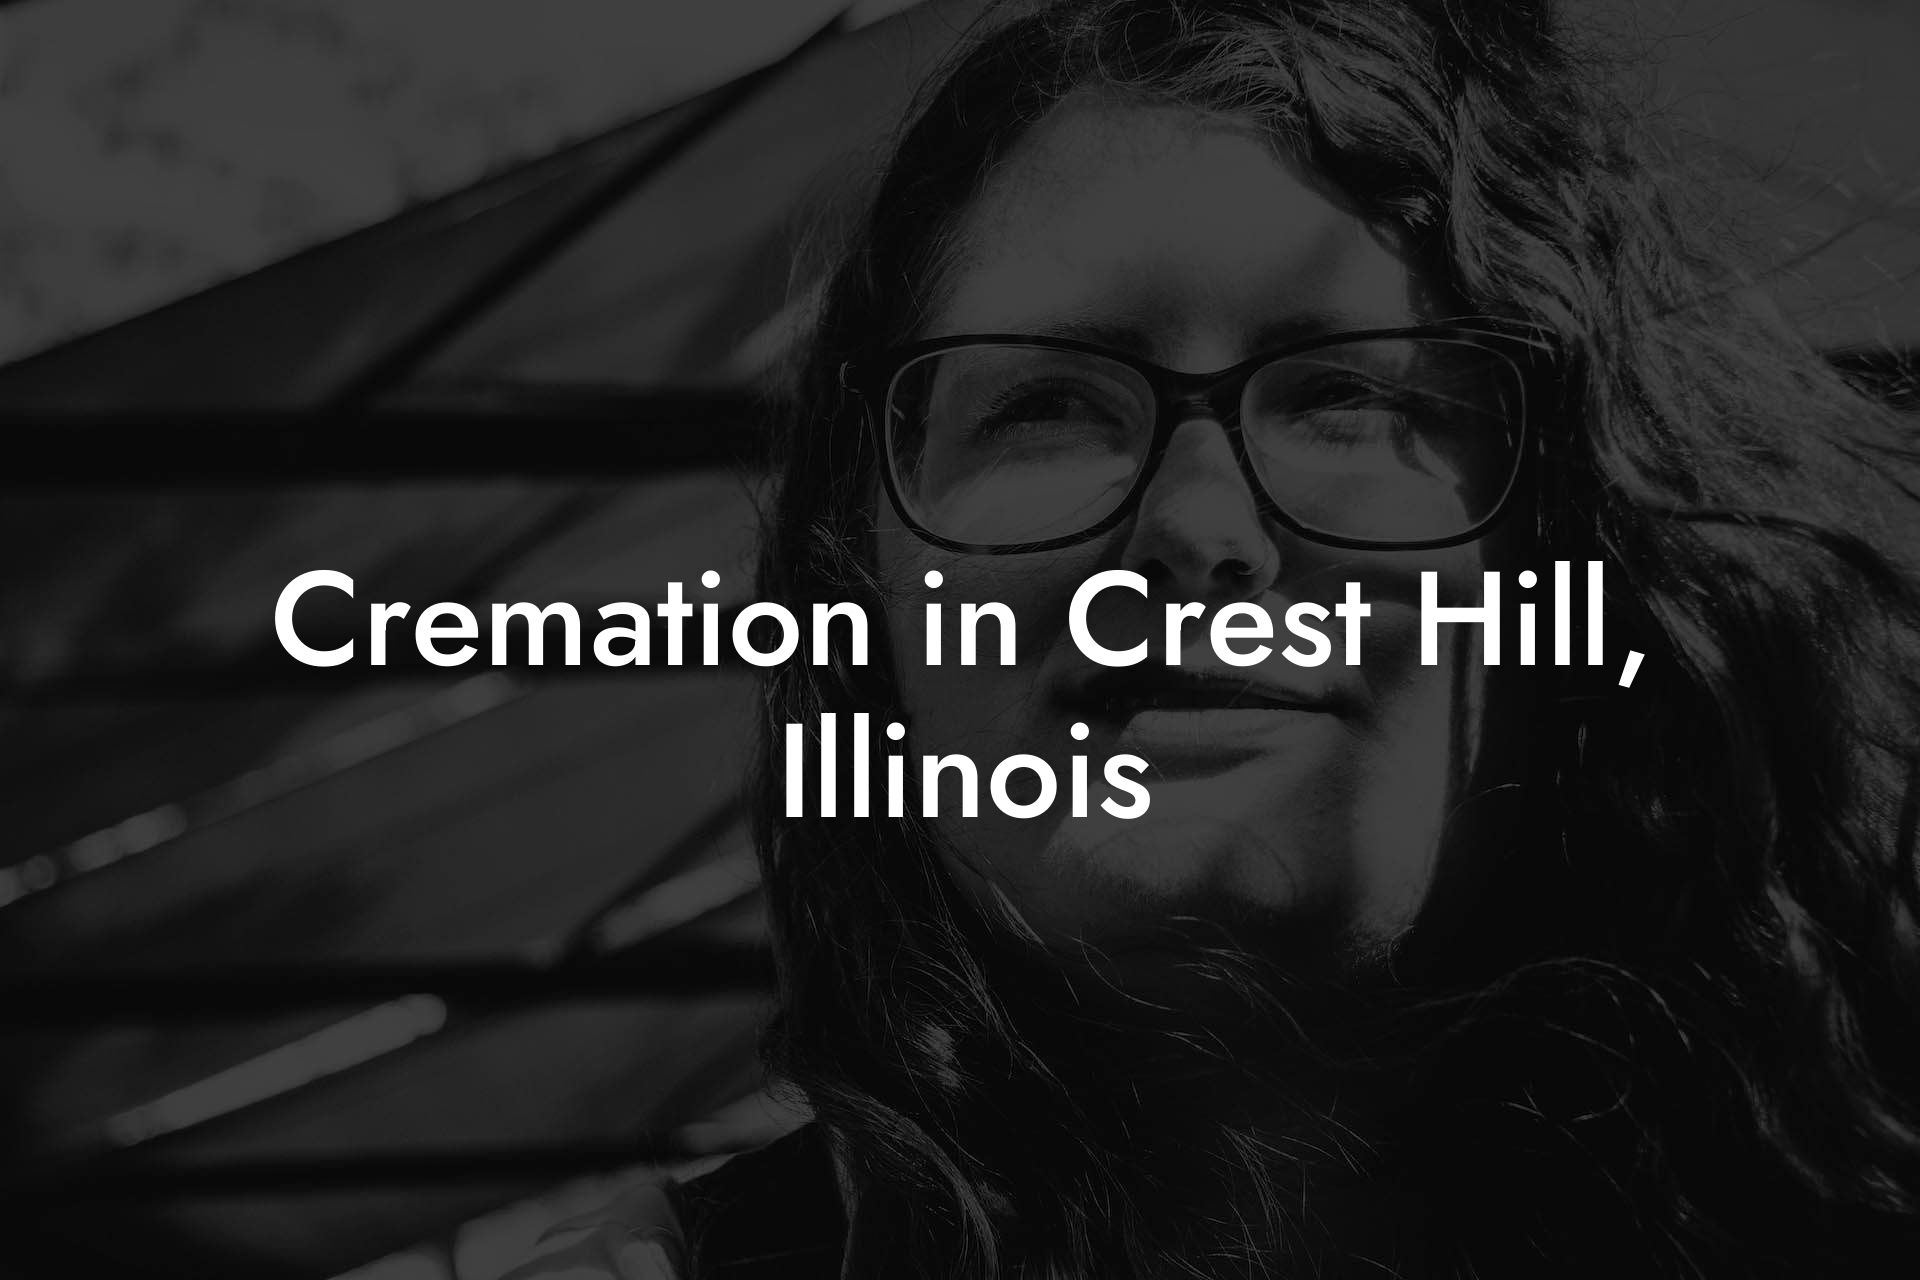 Cremation in Crest Hill, Illinois